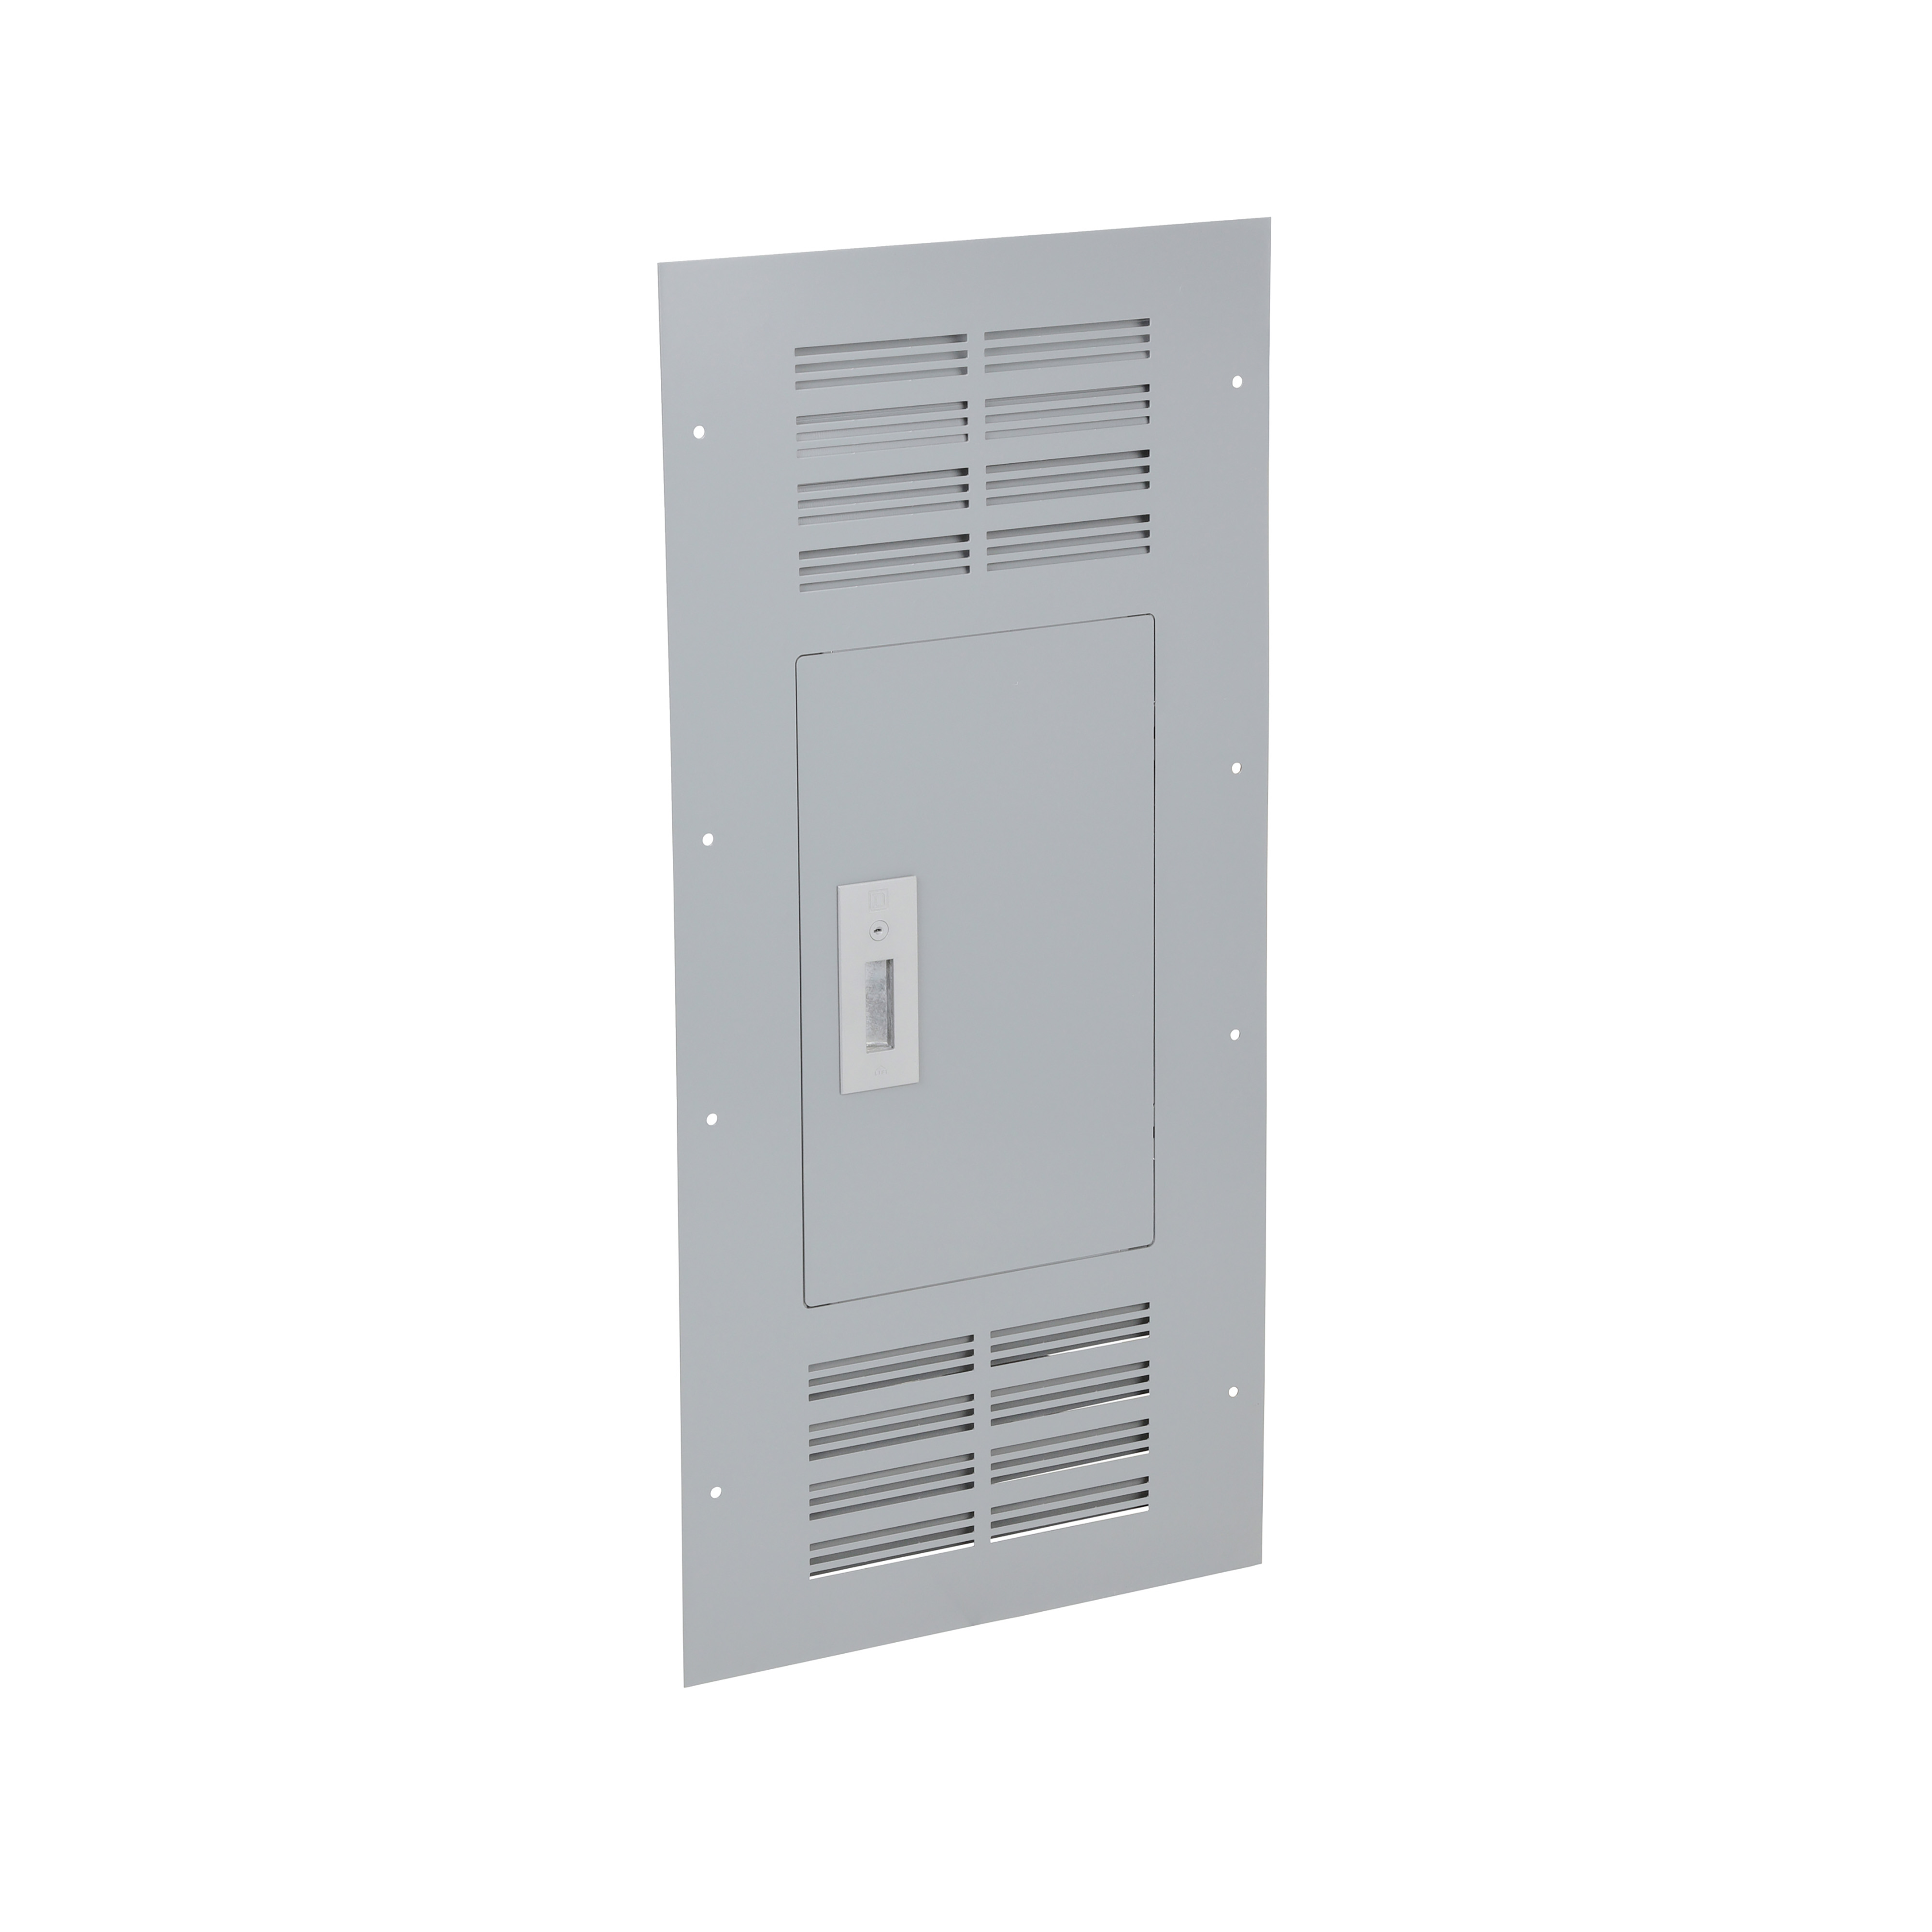 Enclosure Cover, NQNF, Type 1, surface, ventilated, 3 point latch, 20x44in